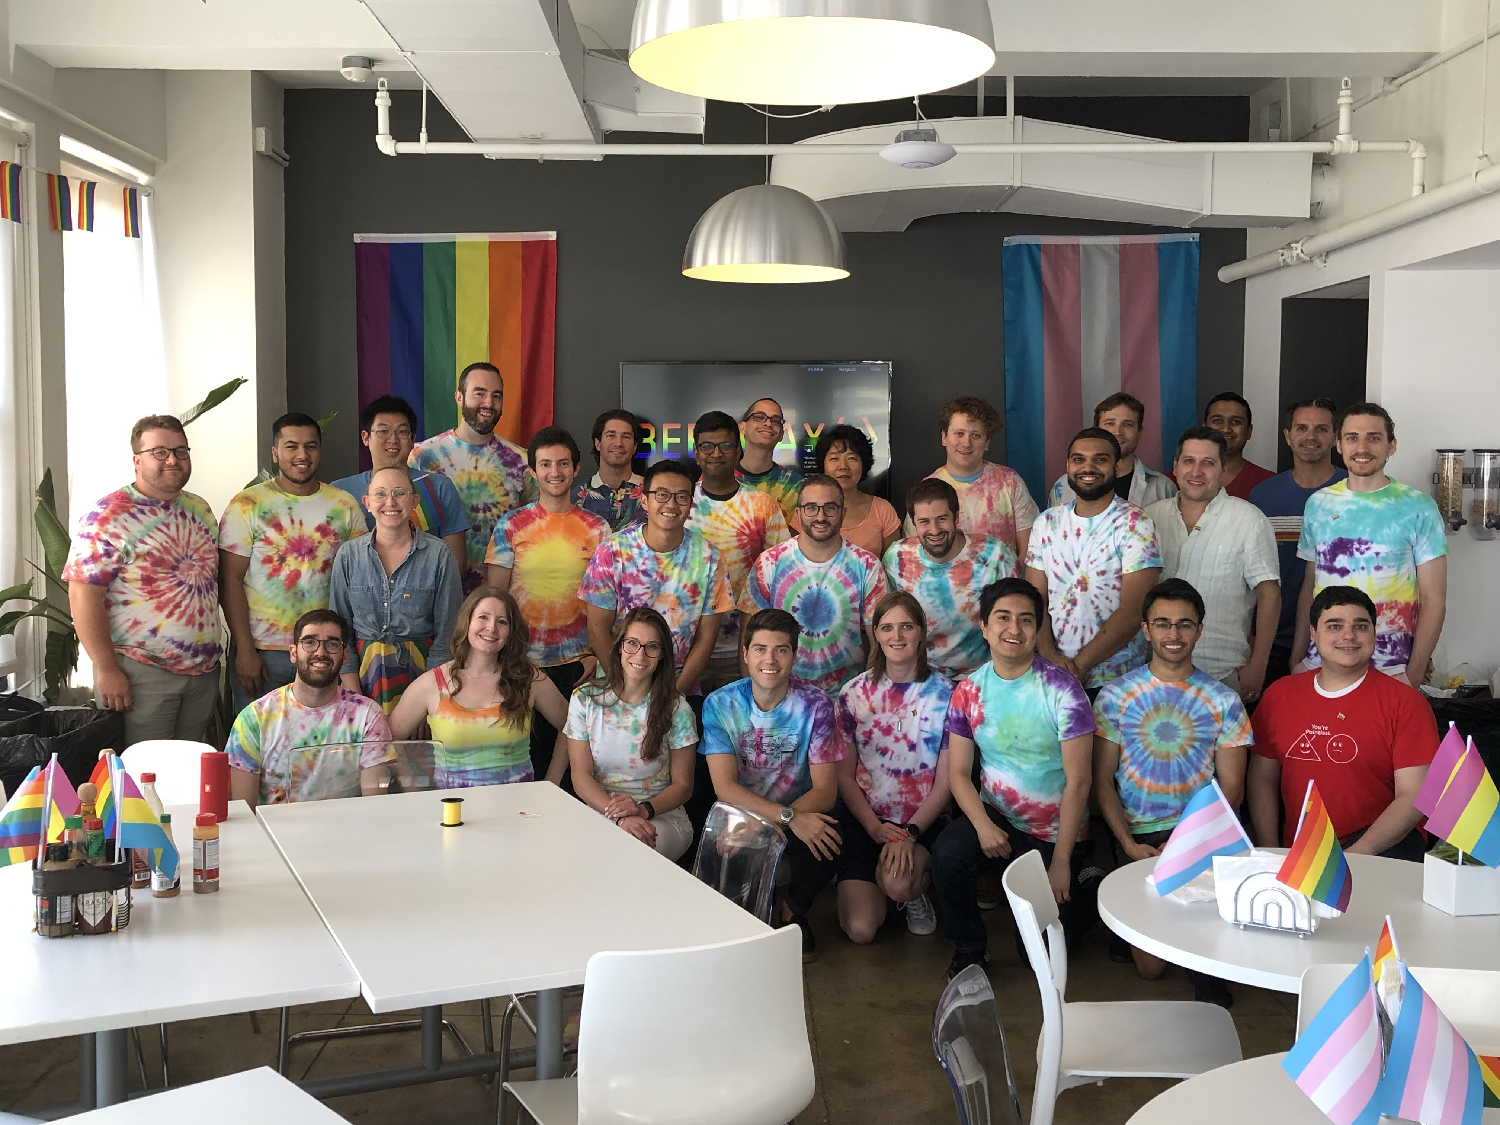 In June, participating Beeswaxers spent an evening doing tie-dye and then wore them to the rainbow-themed party in honor of Pride Month.